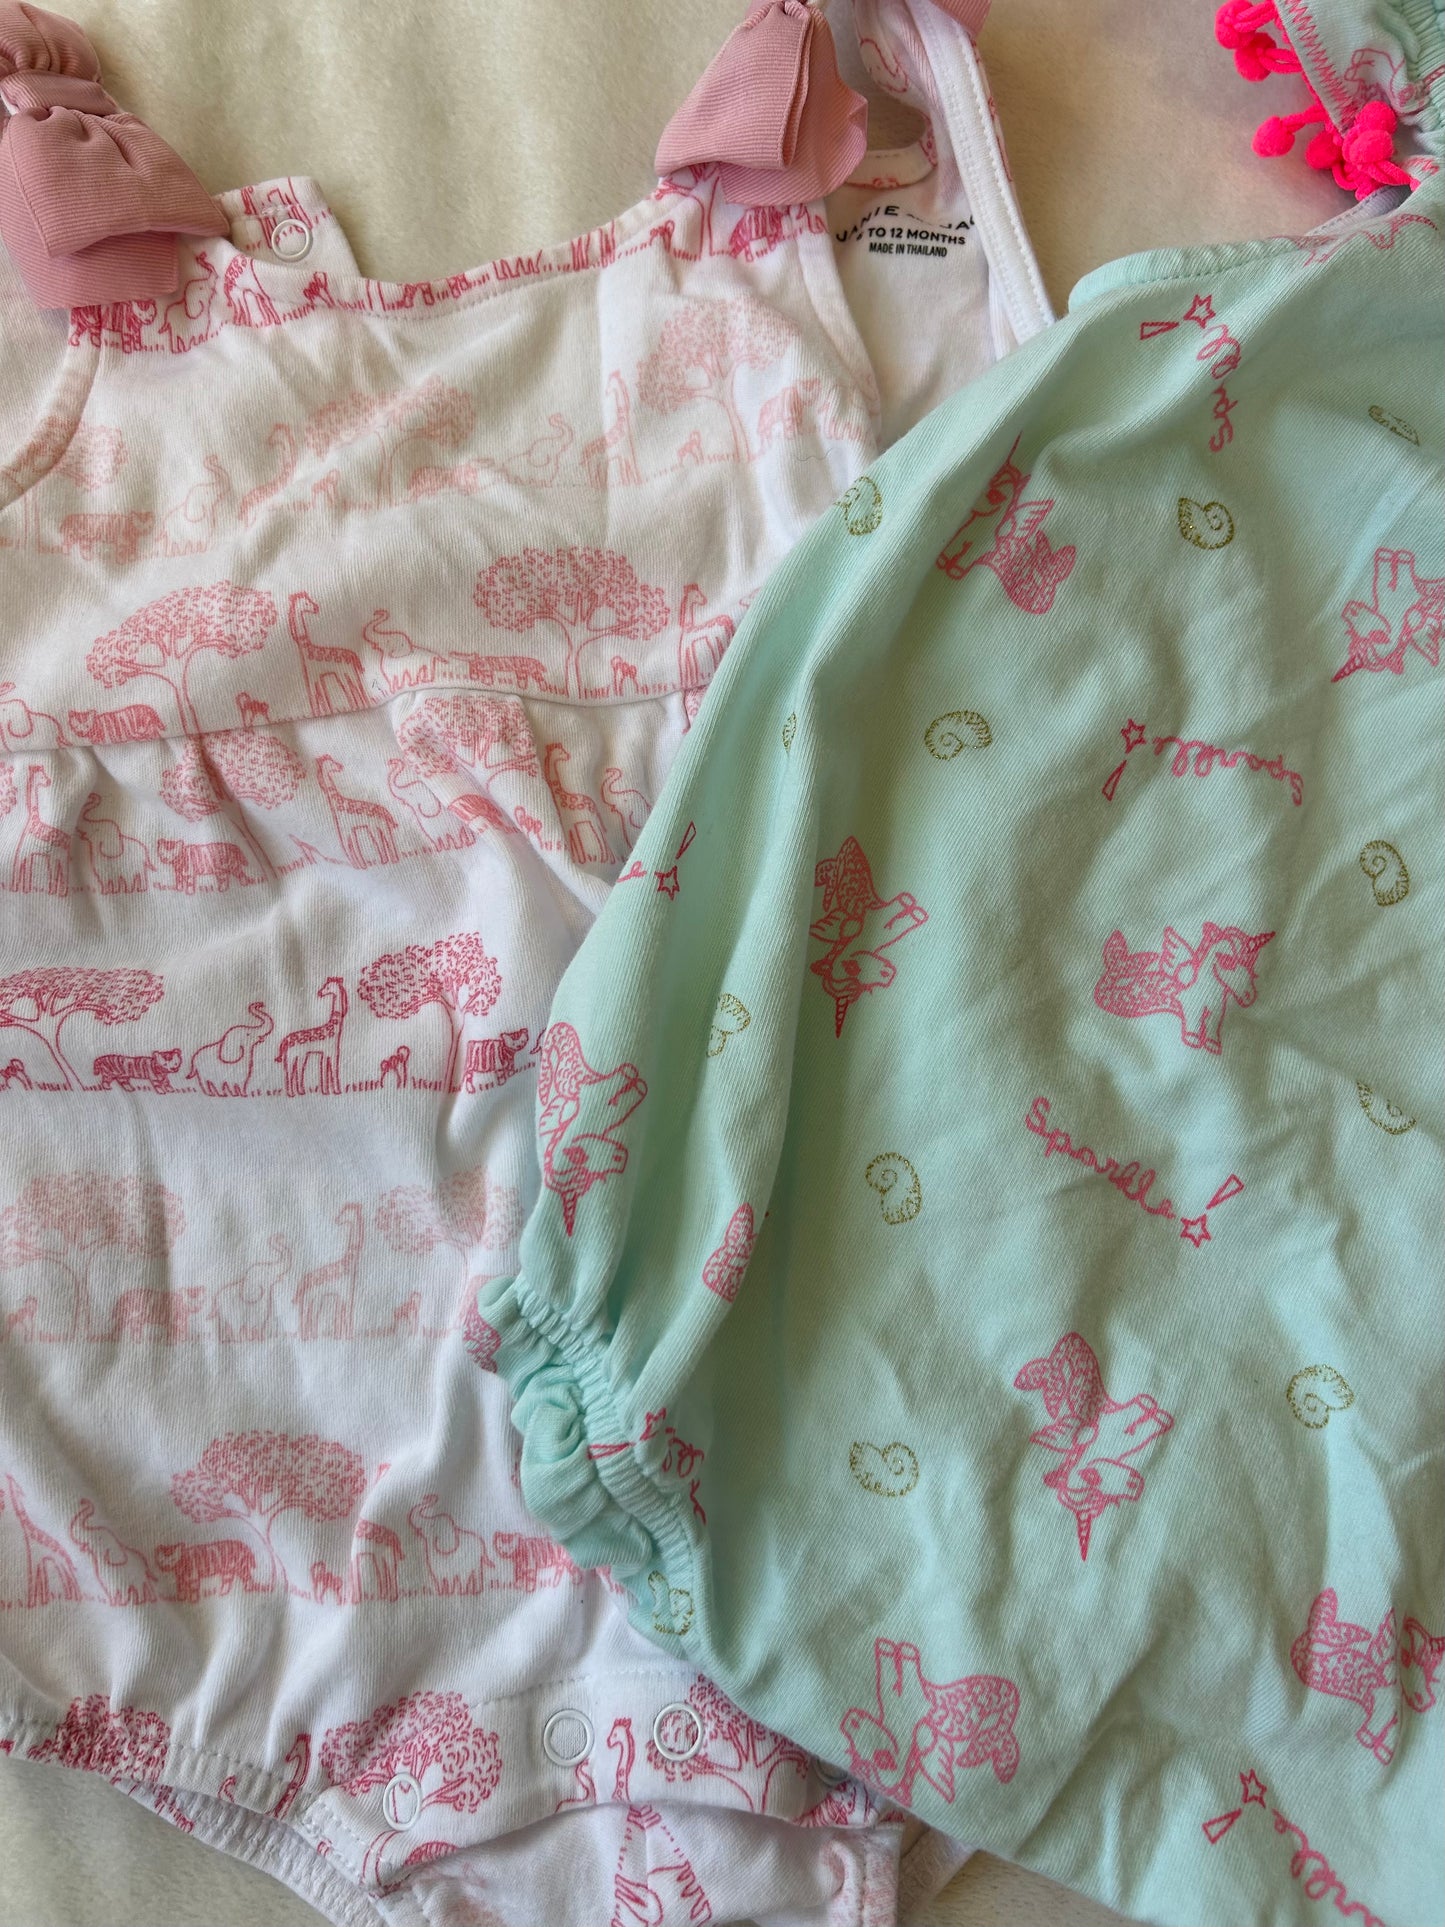 Girls 6 Month Rompers (EGG and Janie & Jack) Blue w/ unicorns and White with Zoo Animals